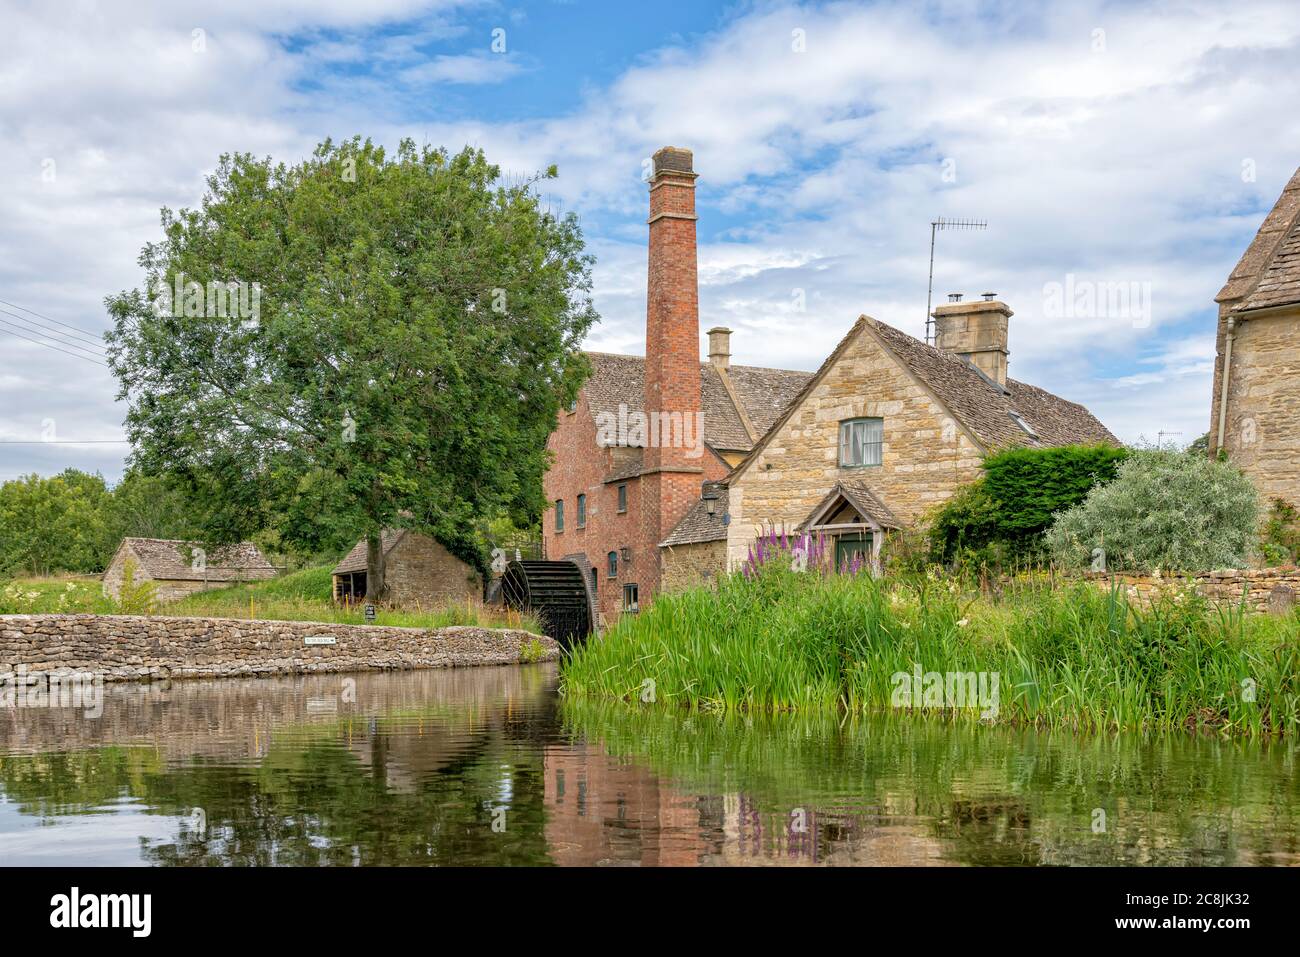 The Old Mill on the River Eye in Lower Slaughter, The Cotswolds, Gloucestershire, United Kingdom Stock Photo